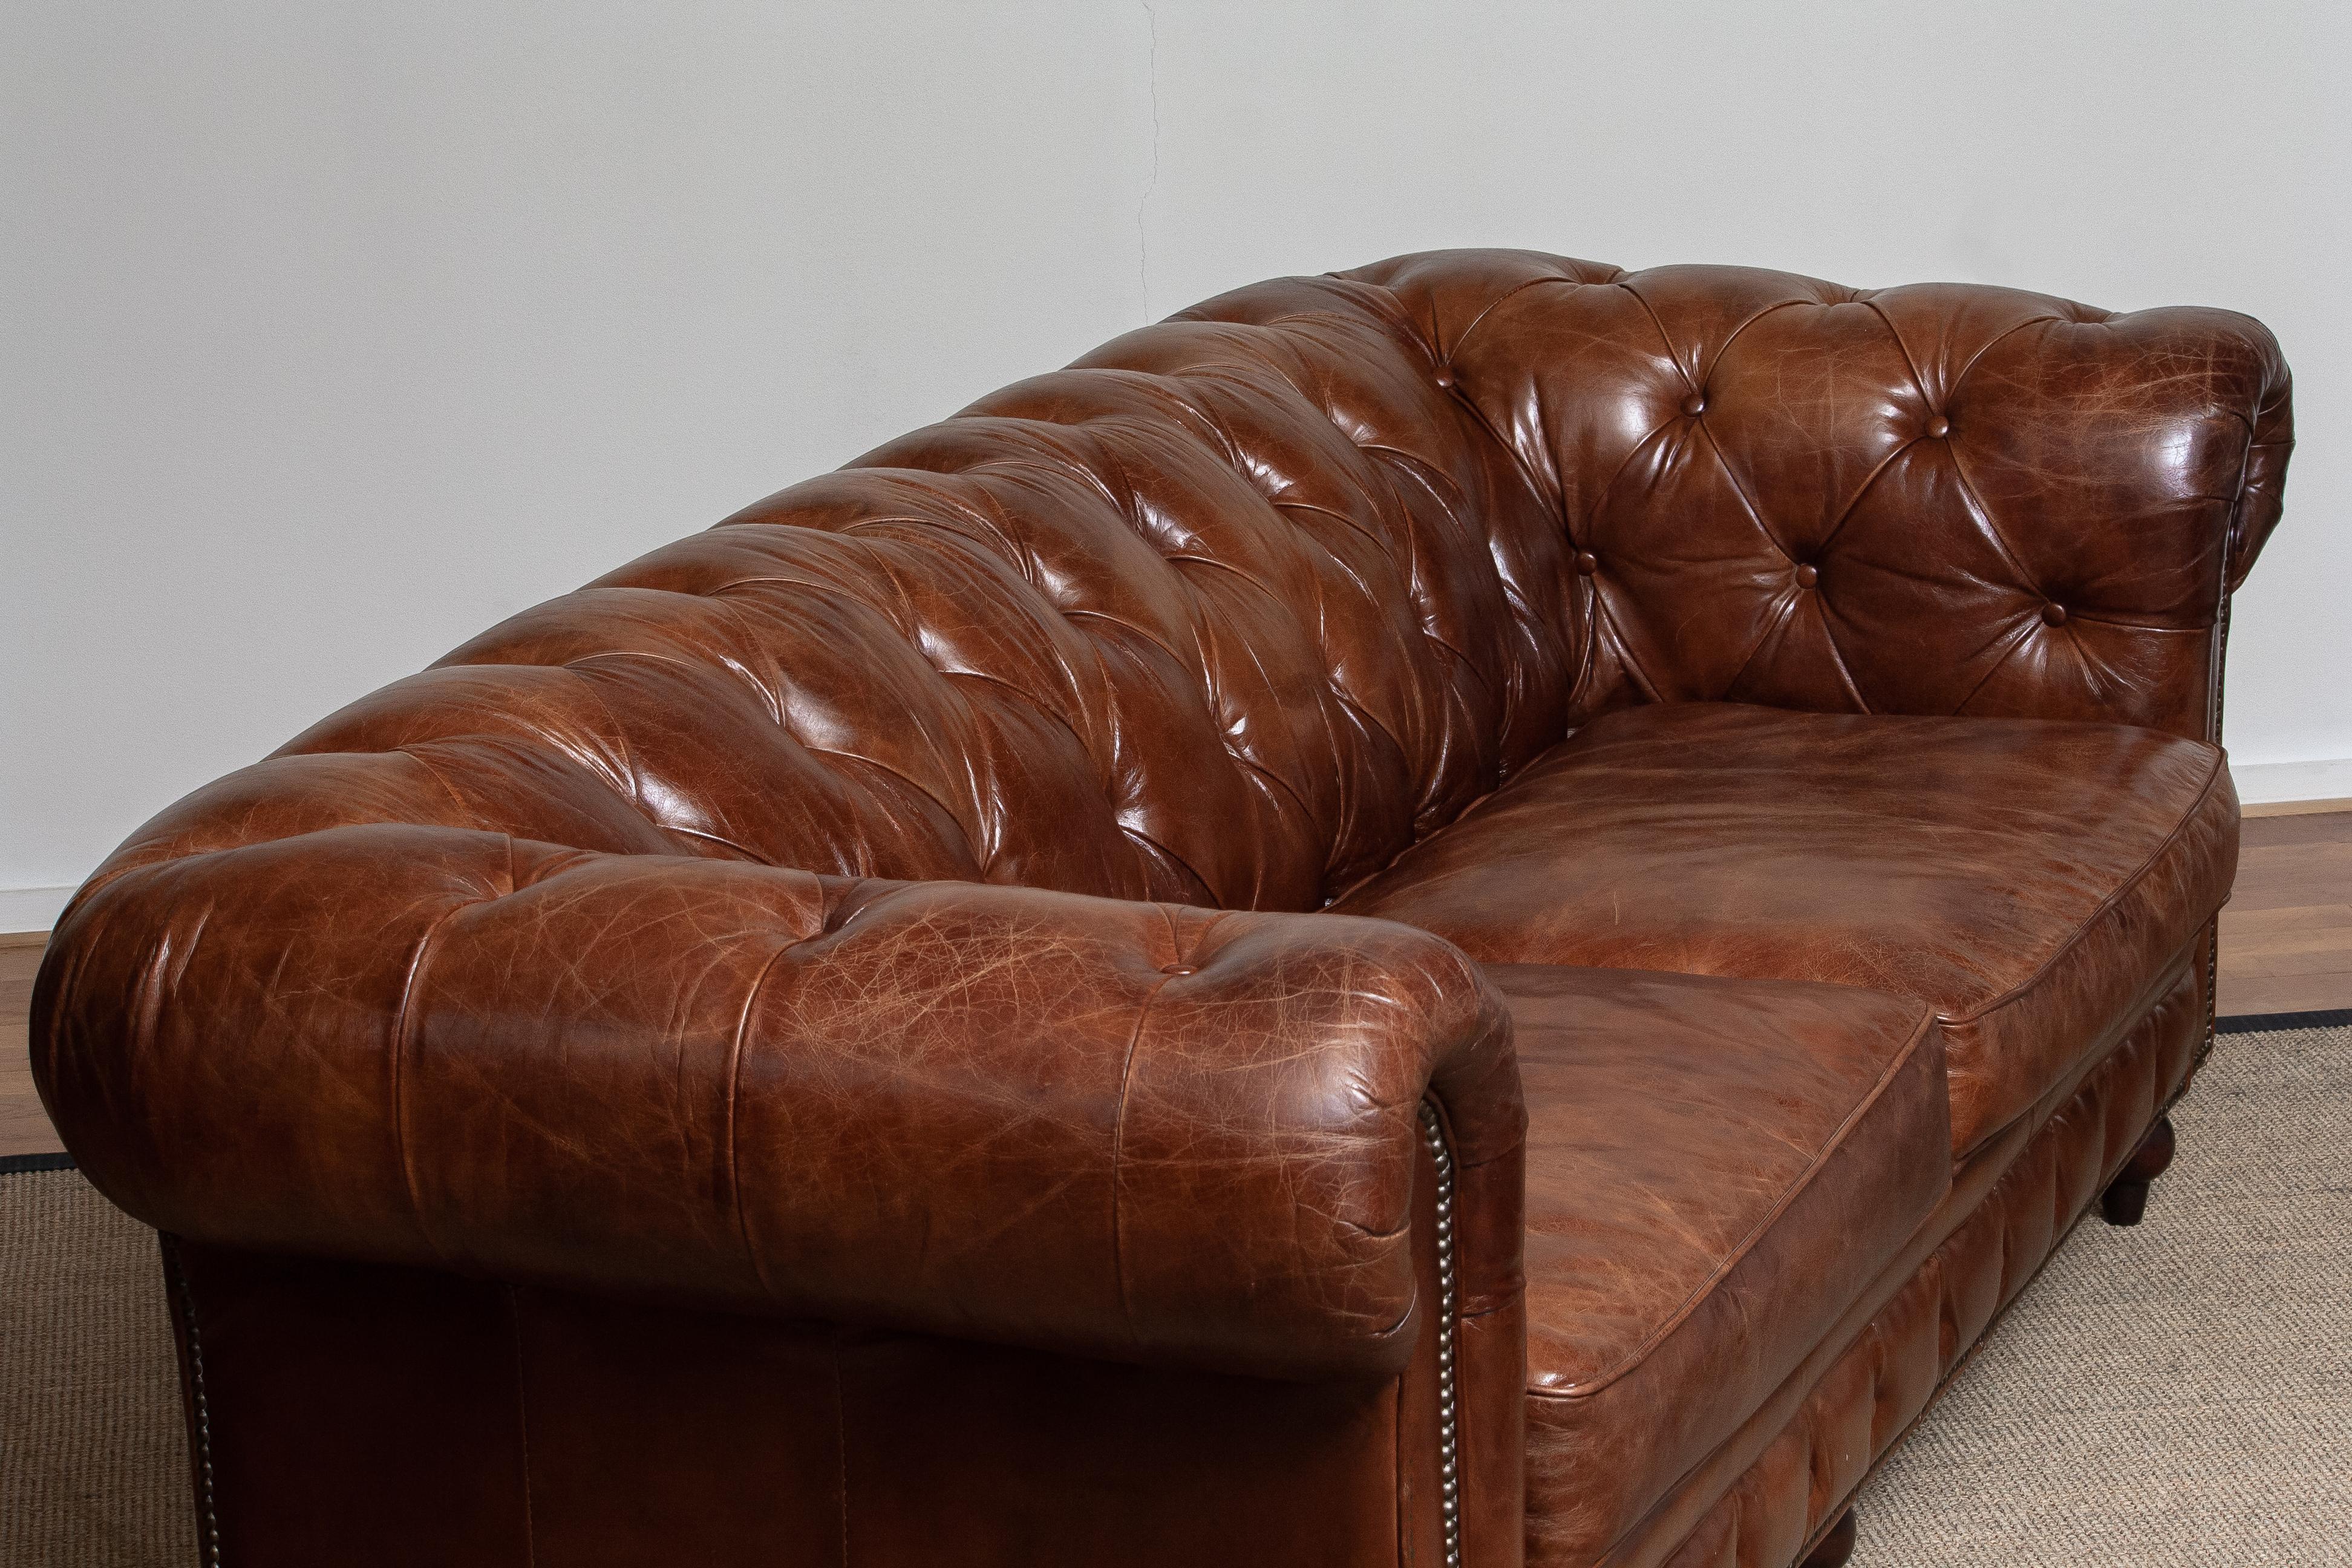 Tufted Brown Leather English Chesterfield Sofa from the 20th Century 3